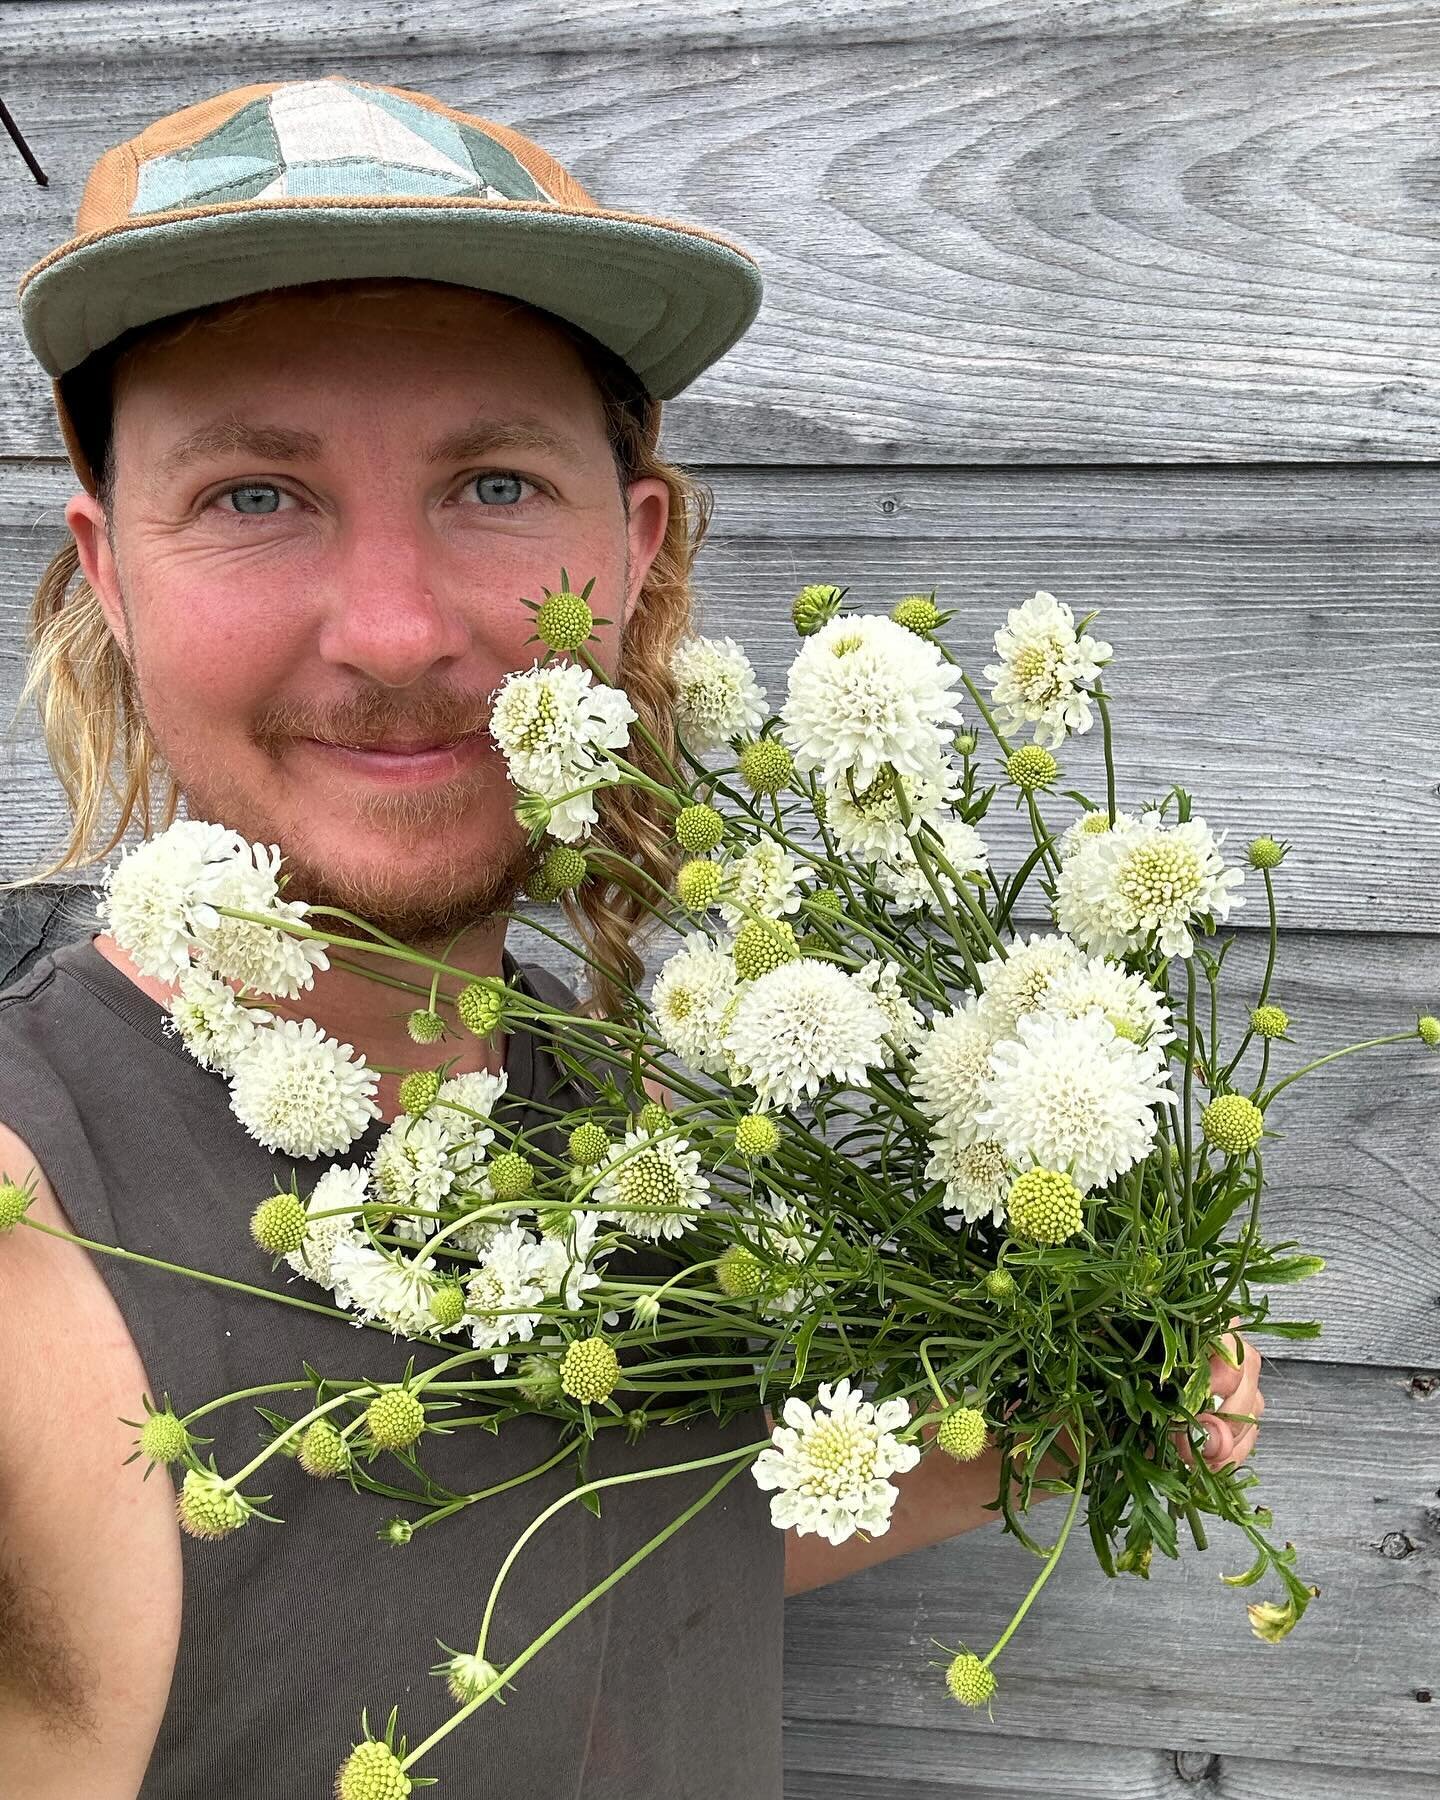 Happy trans day of visibility!! I&rsquo;ll be here, taking selfies, growing flowers, and sharing my story. Thank you for following along and building a community through this platform beyond our farm gates in rural Maine. I hope Dandy Ram helps other